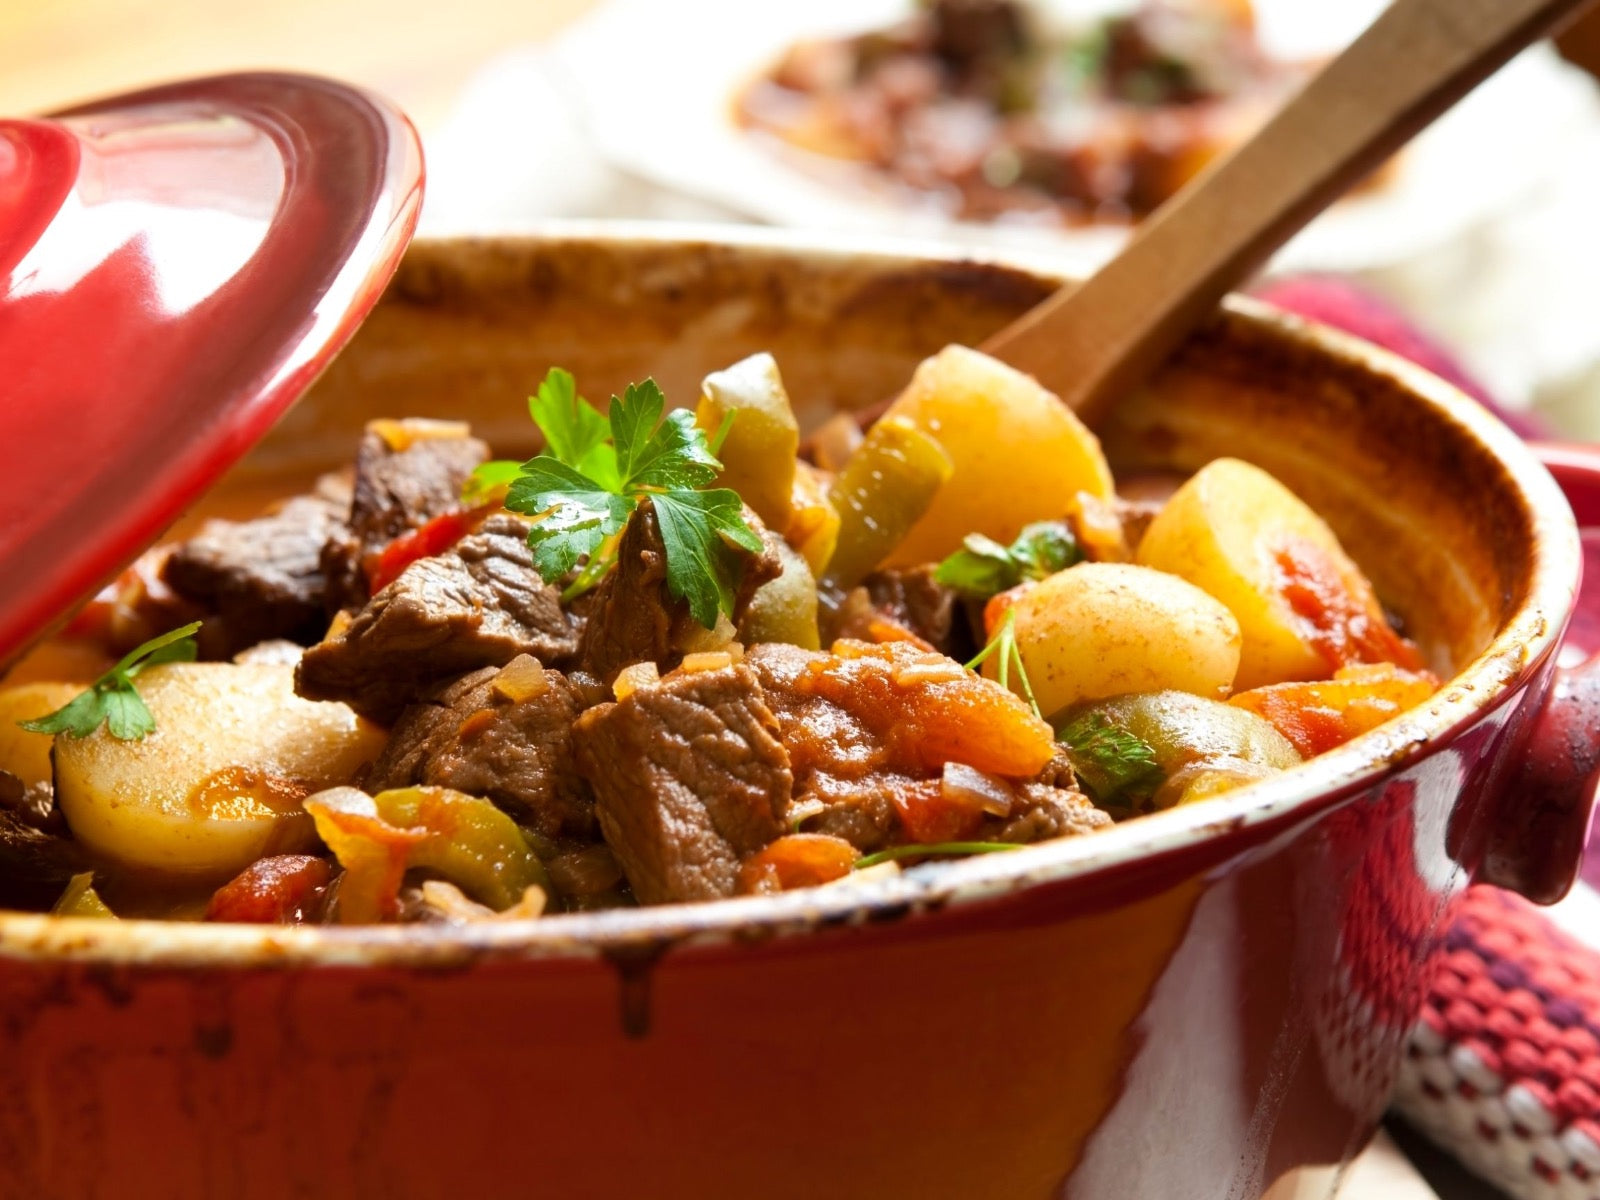 Stay Warm This Winter With Three Mushroom Bison Stew - Beck & Bulow